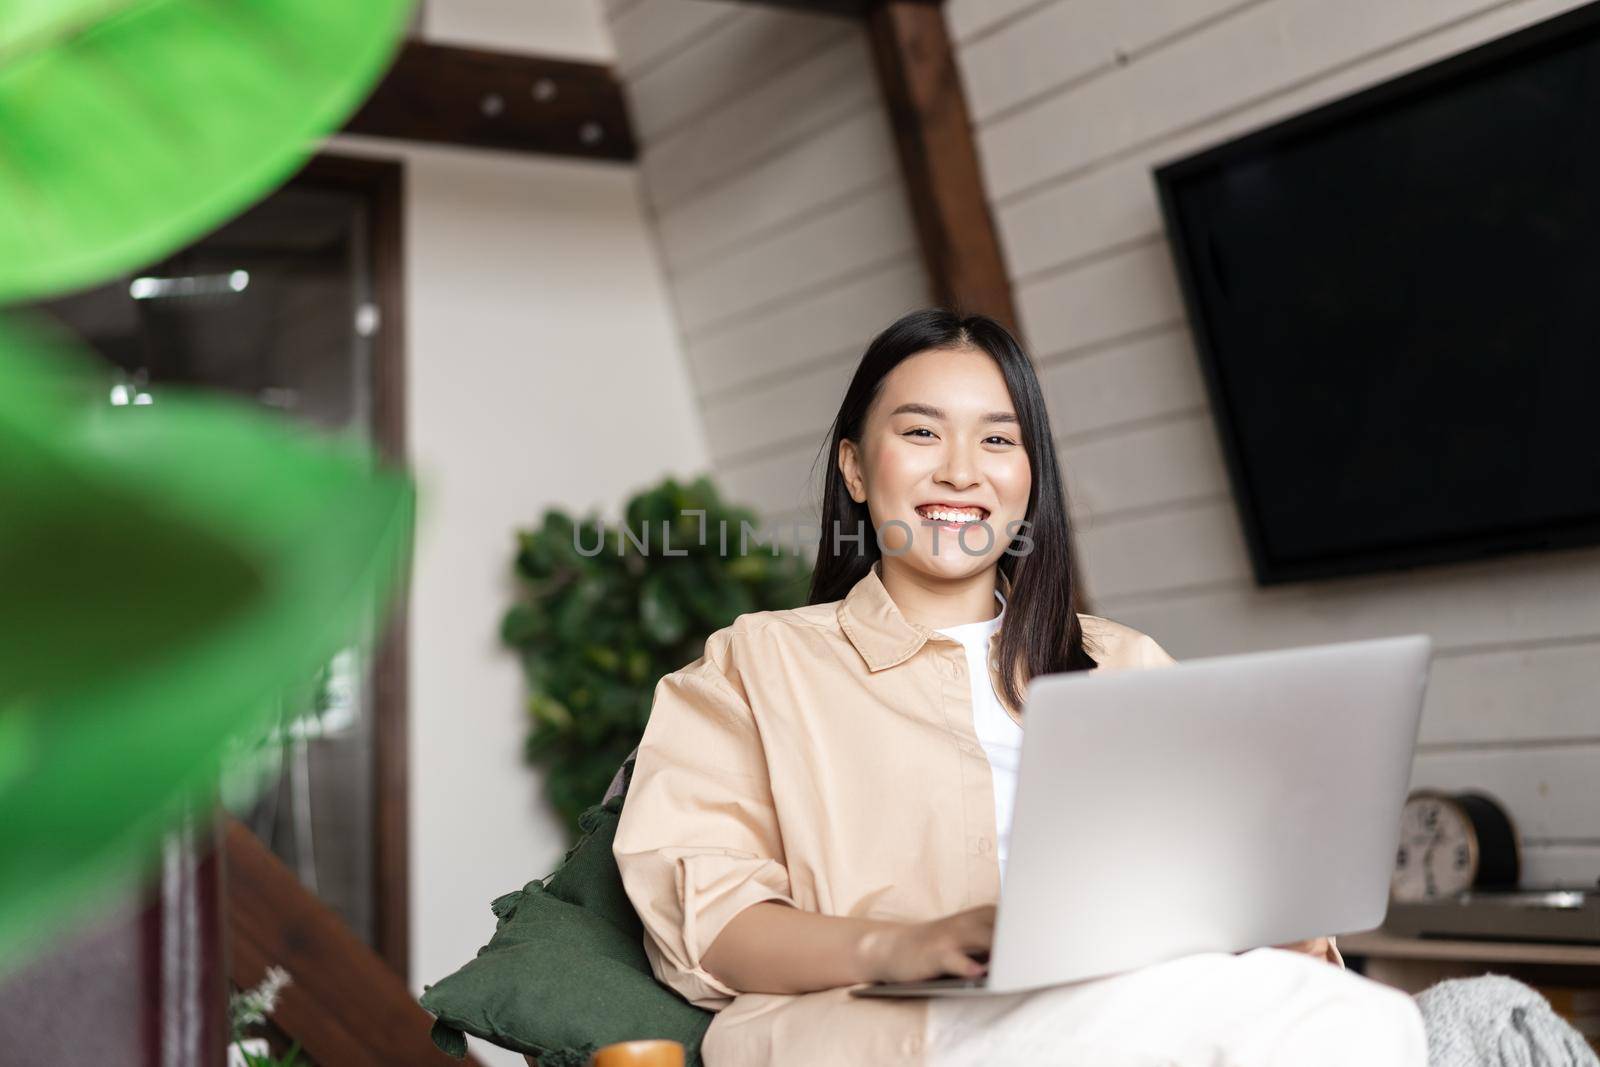 Smiling korean girl sitting and resting at home near tv, using laptop, relaxing and surfing net.